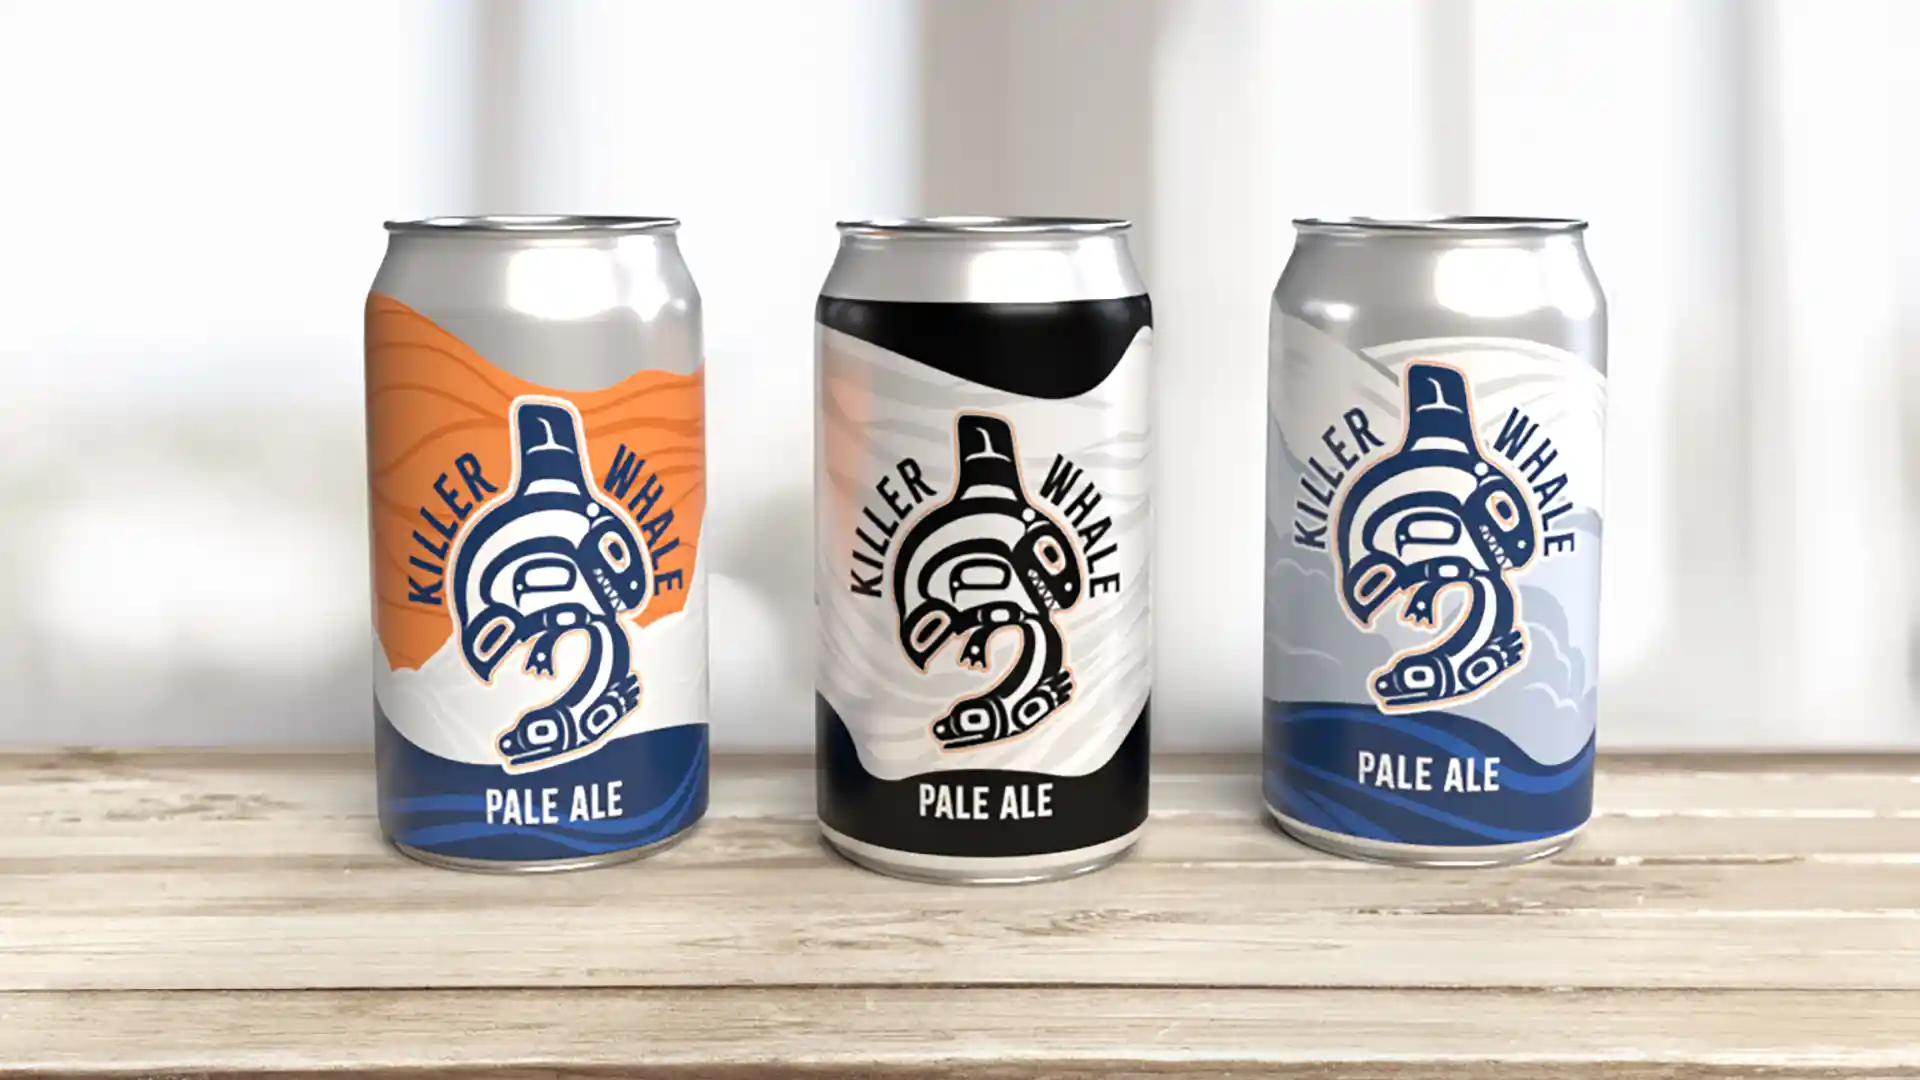 It’s National Beer Day: Cast Your Vote for Our New Label